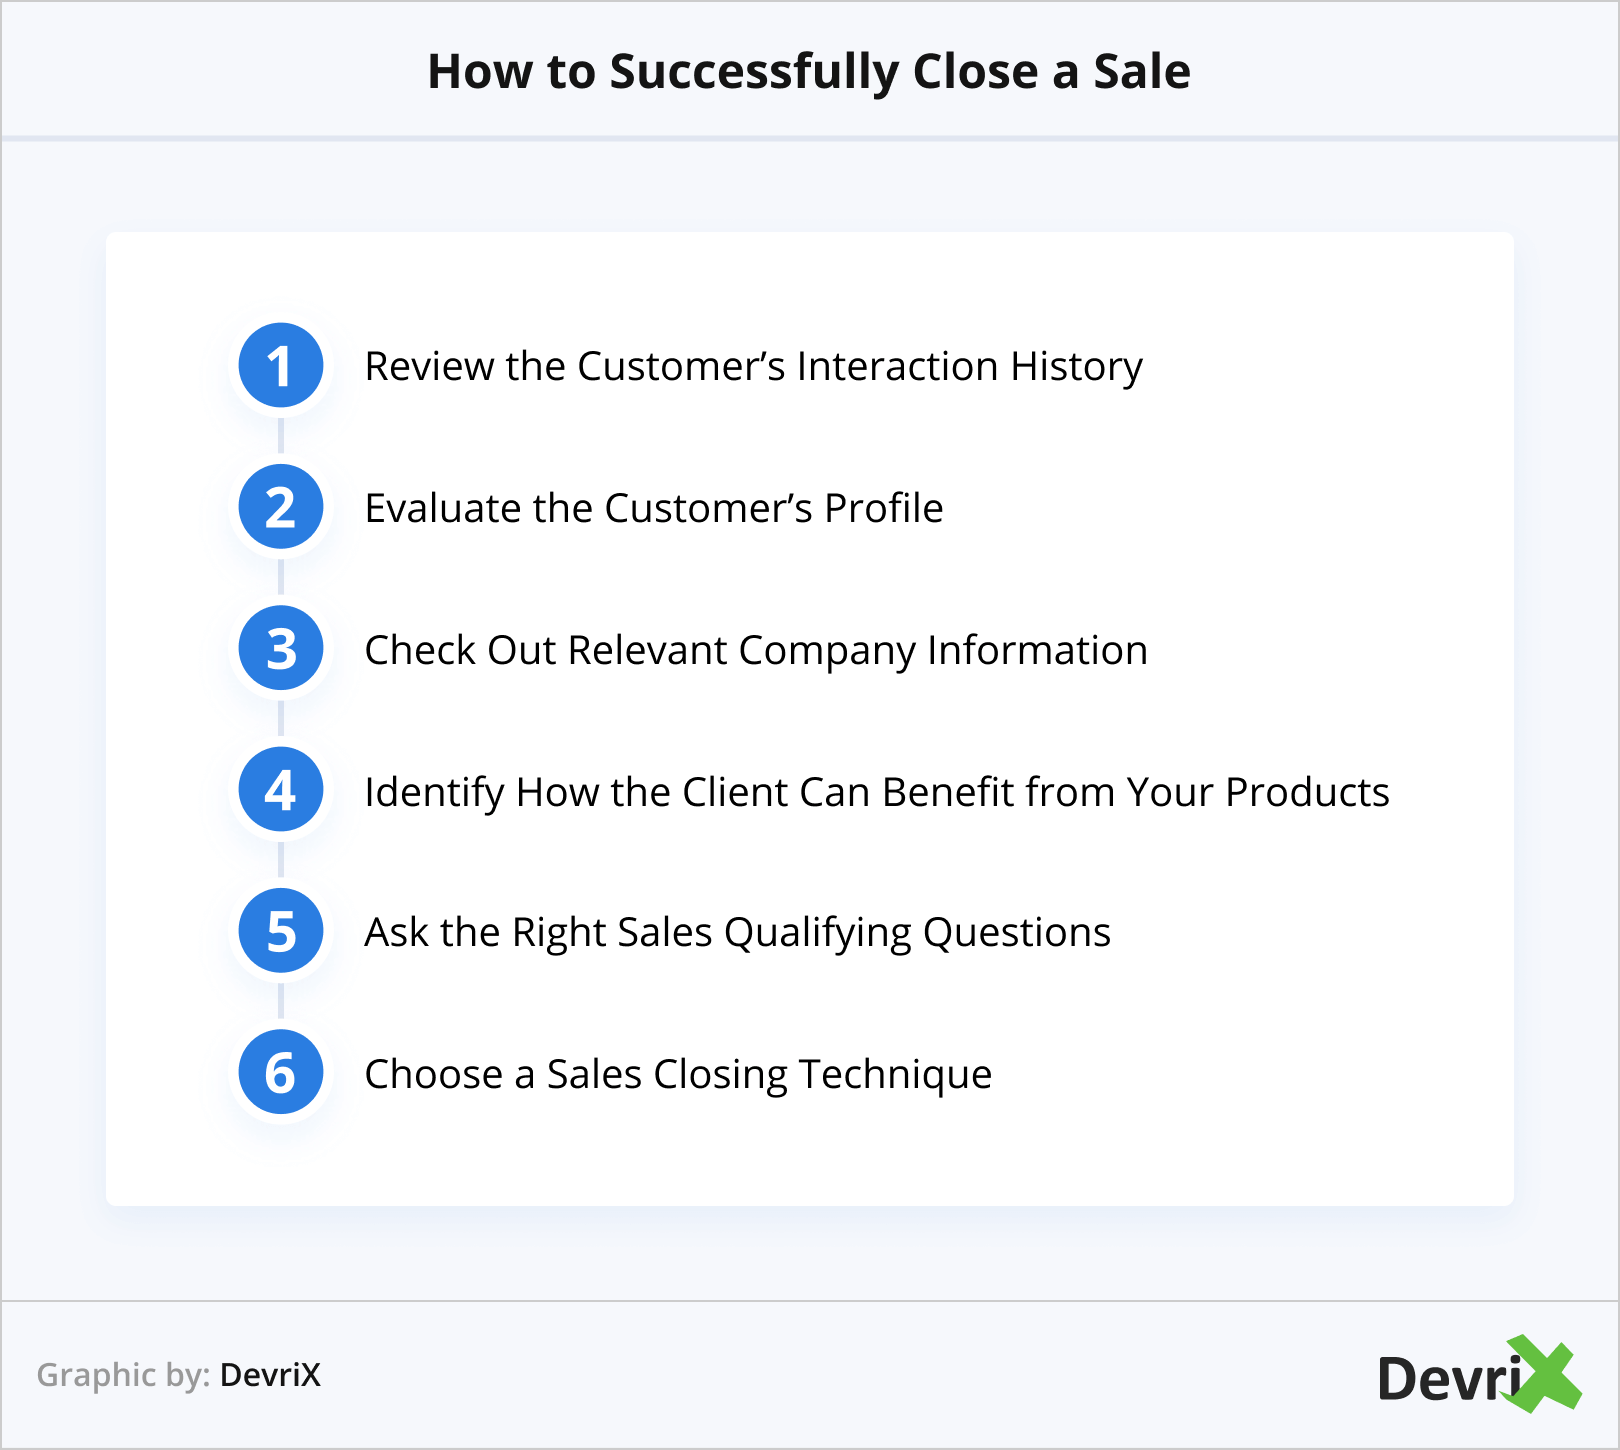 How to Successfully Close a Sale